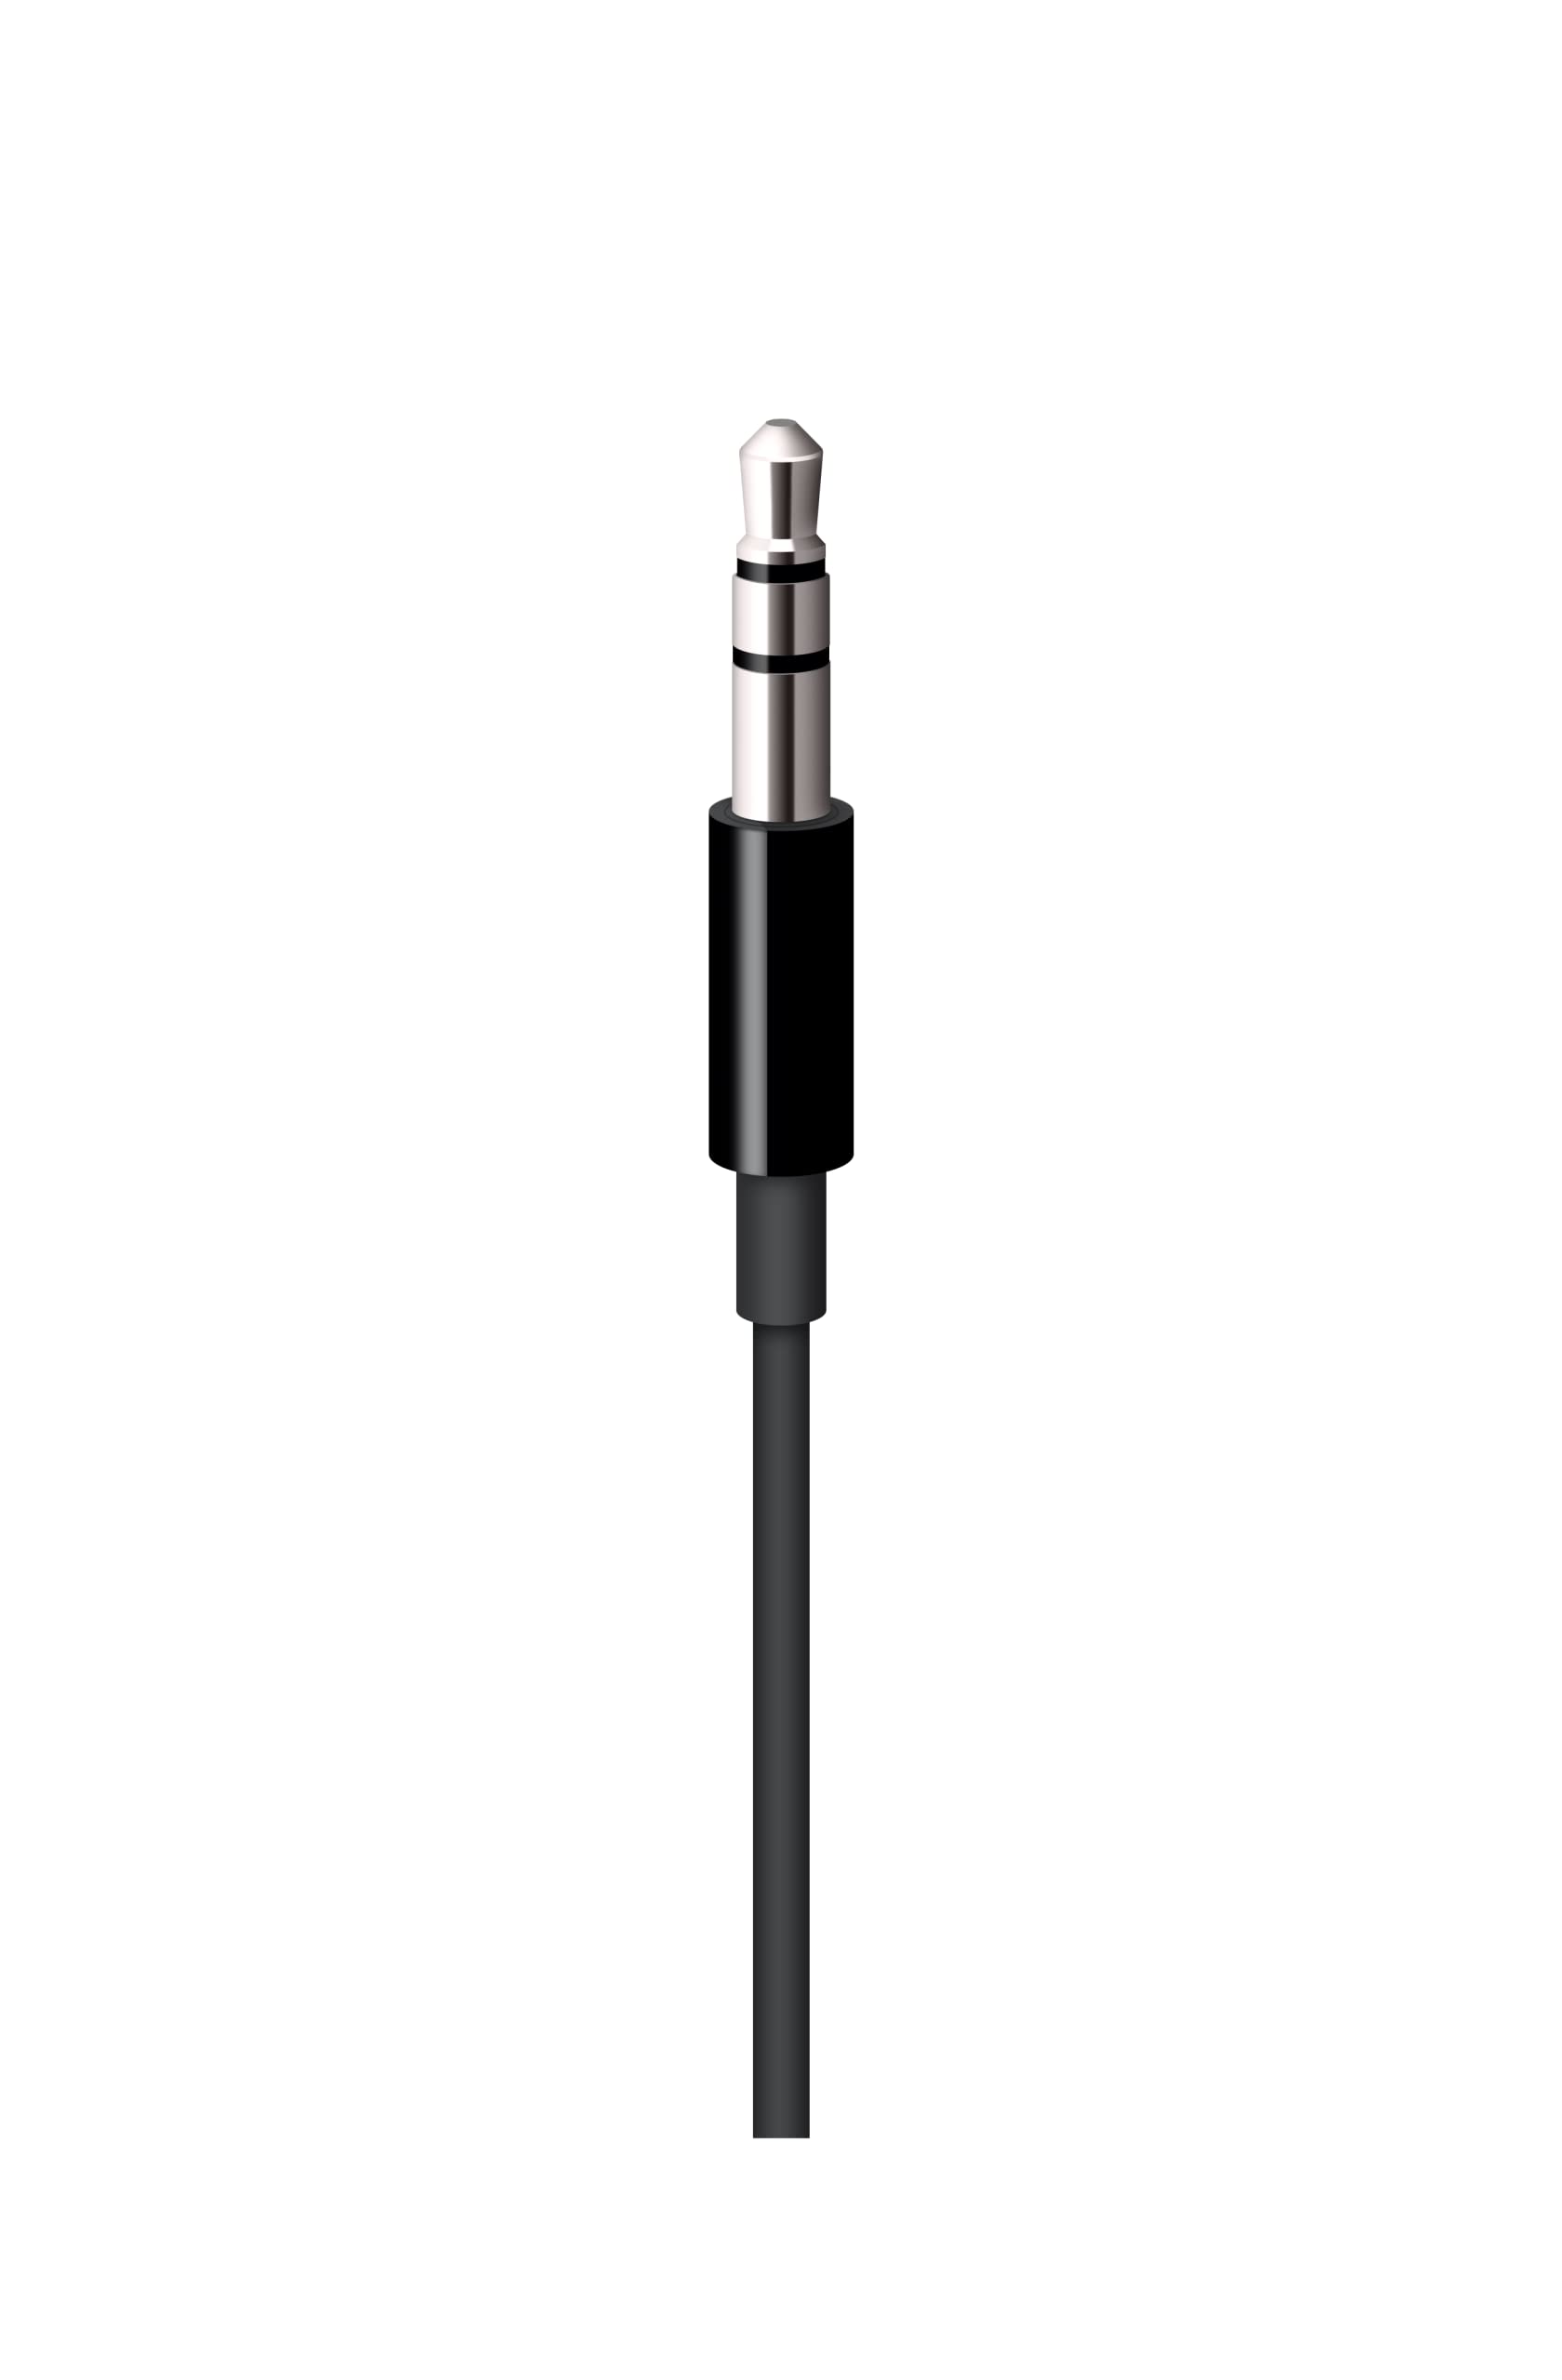 Apple Lighting to 3.5mm Audio Cable - Black